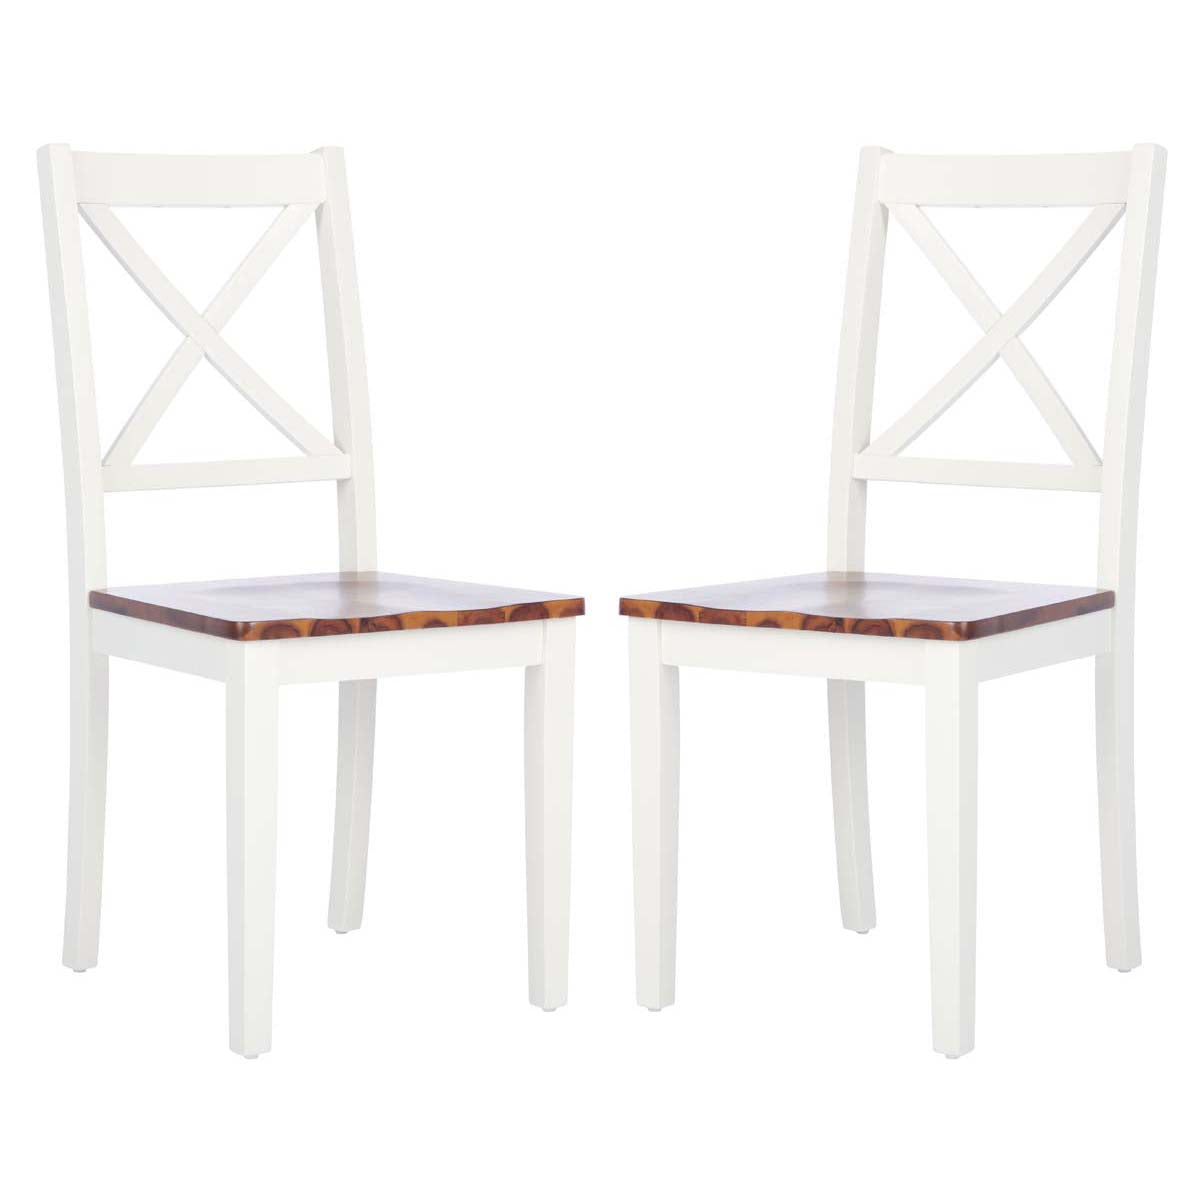 Safavieh Silio X Back Dining Chair, DCH9214 - White/Natural (Set of 2)